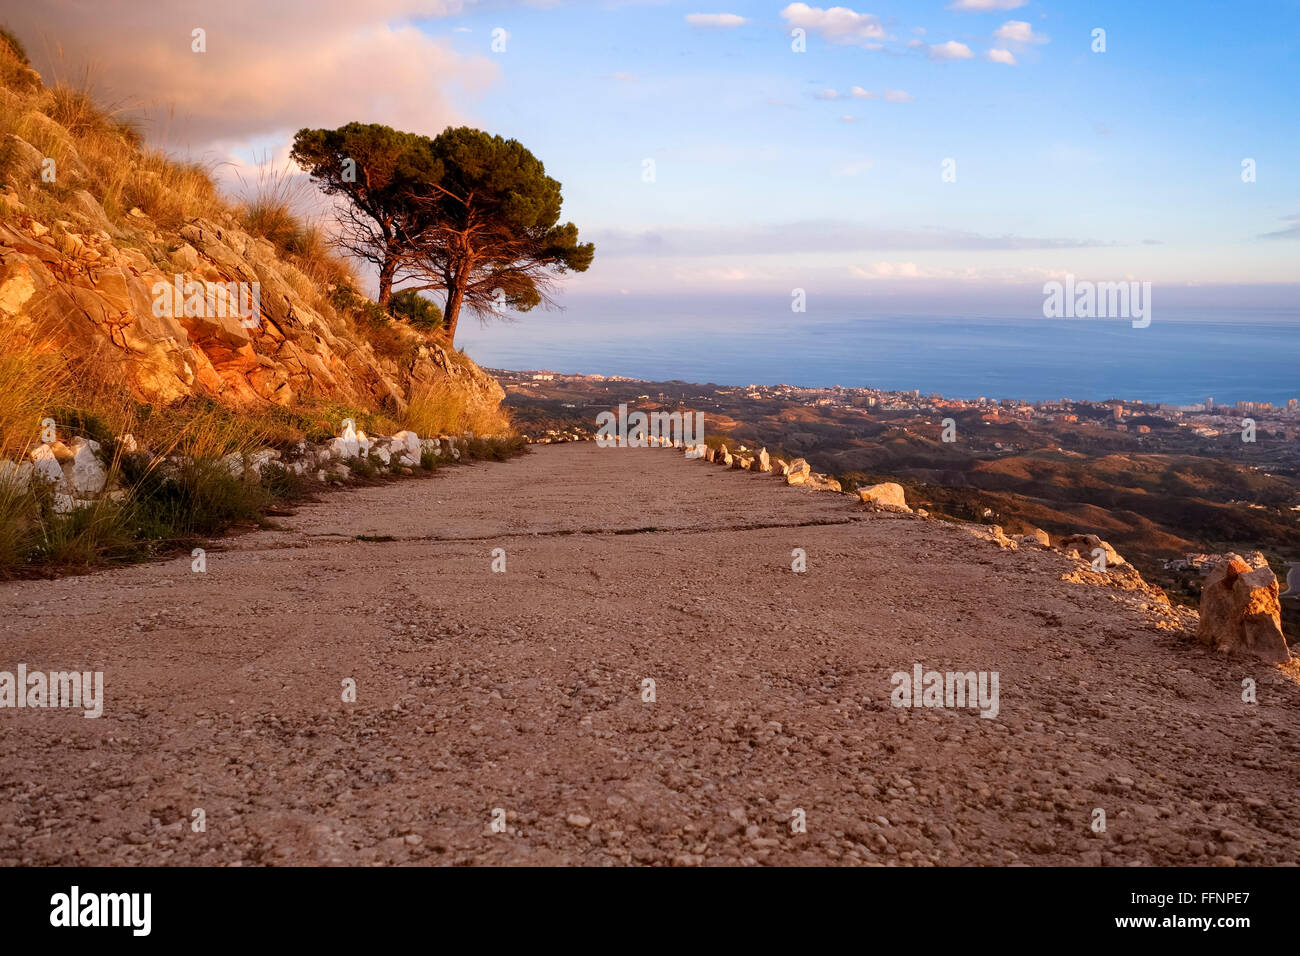 Concrete road in mountain area with Aleppo trees, no crash barrier during beautiful sunset. MIjas, Spain. Stock Photo